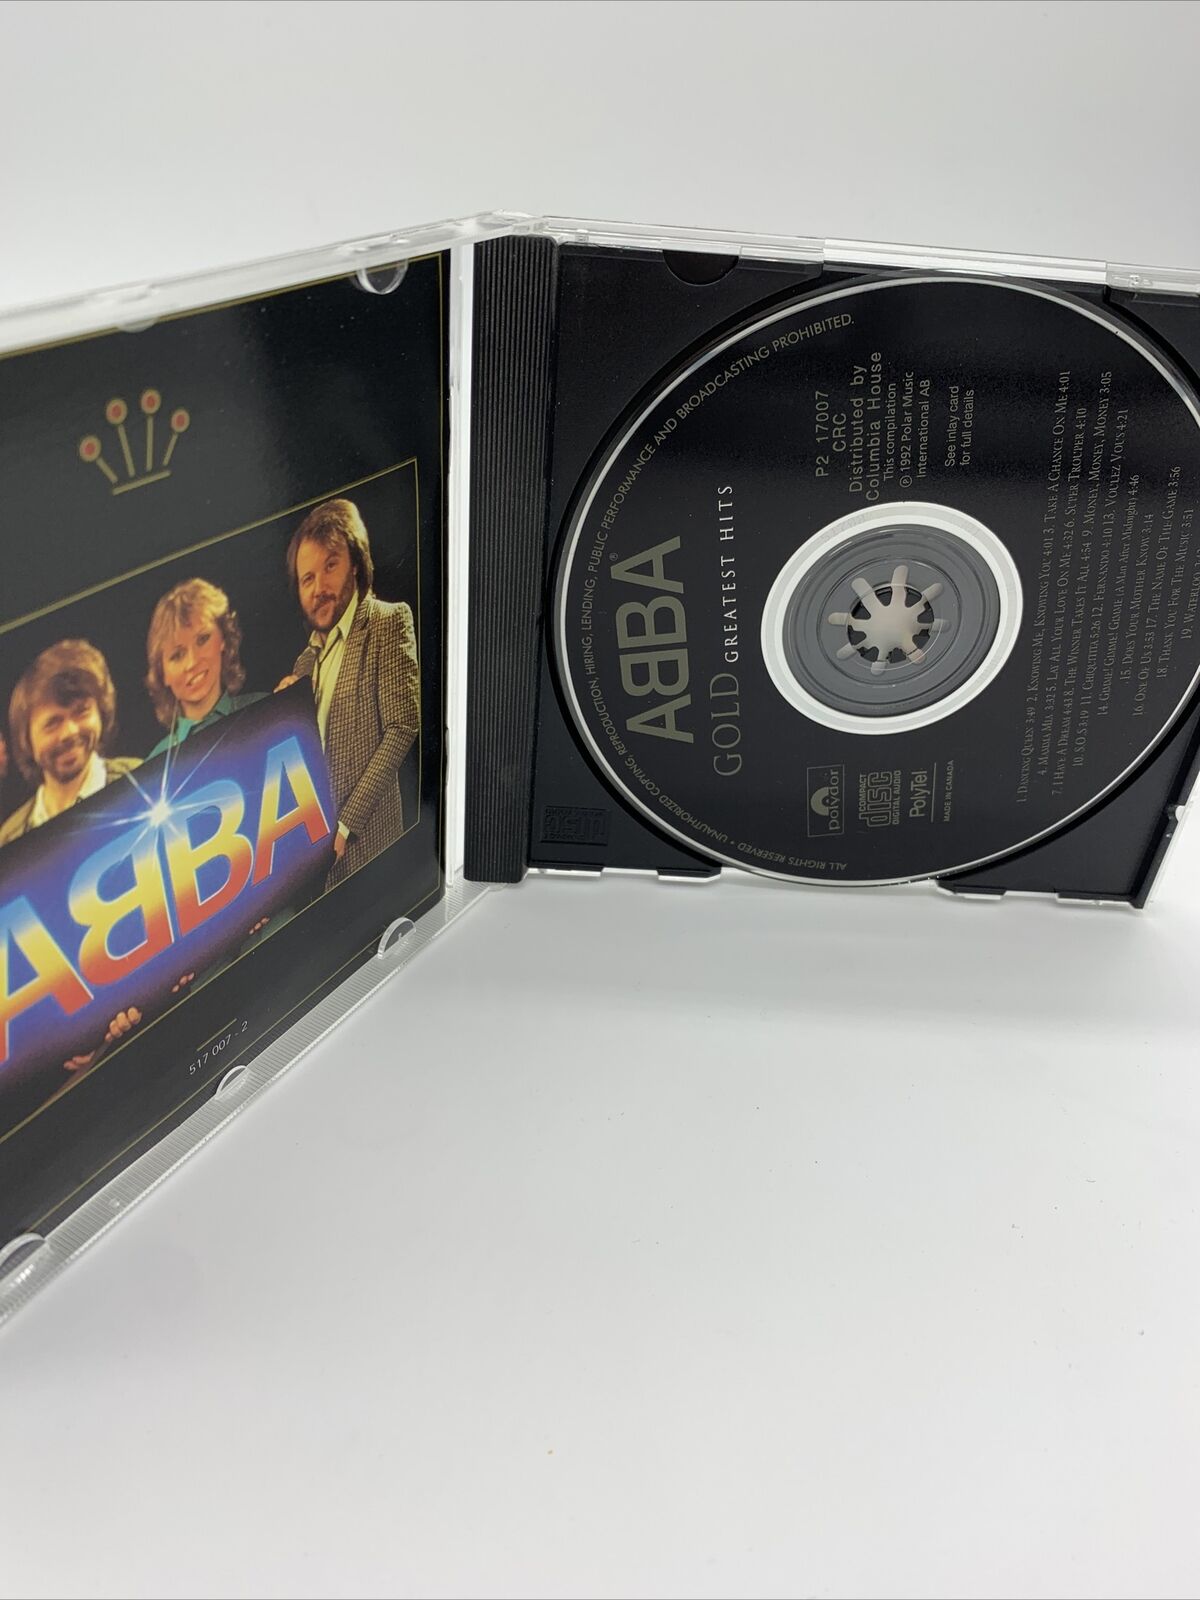 ABBA - Gold Greatest Hits